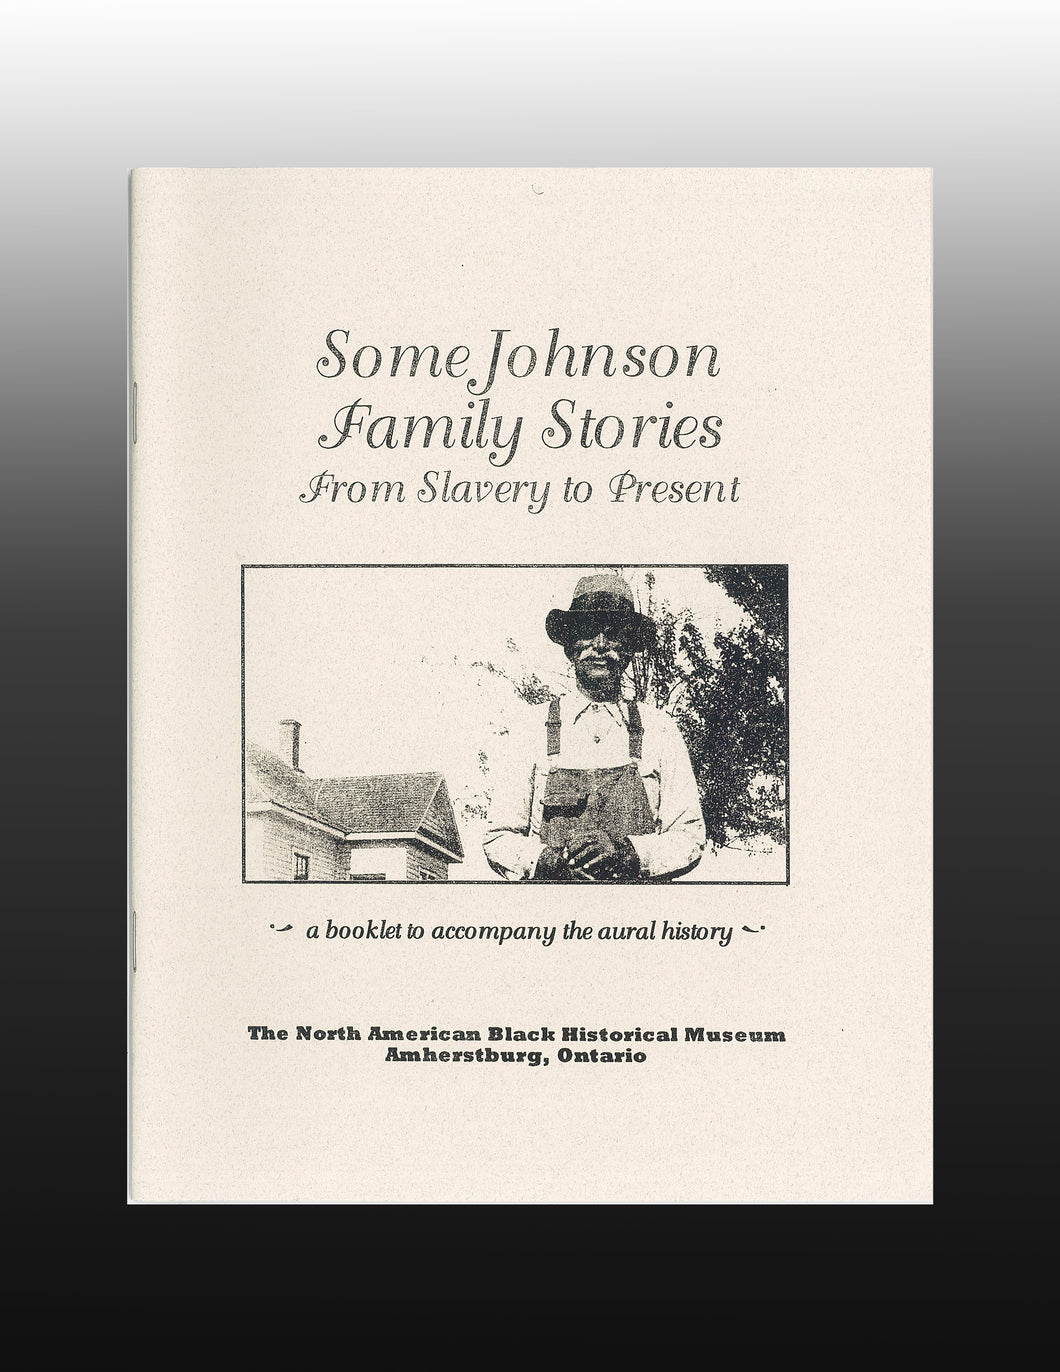 Some Johnson Family Stories From Slavery to Present